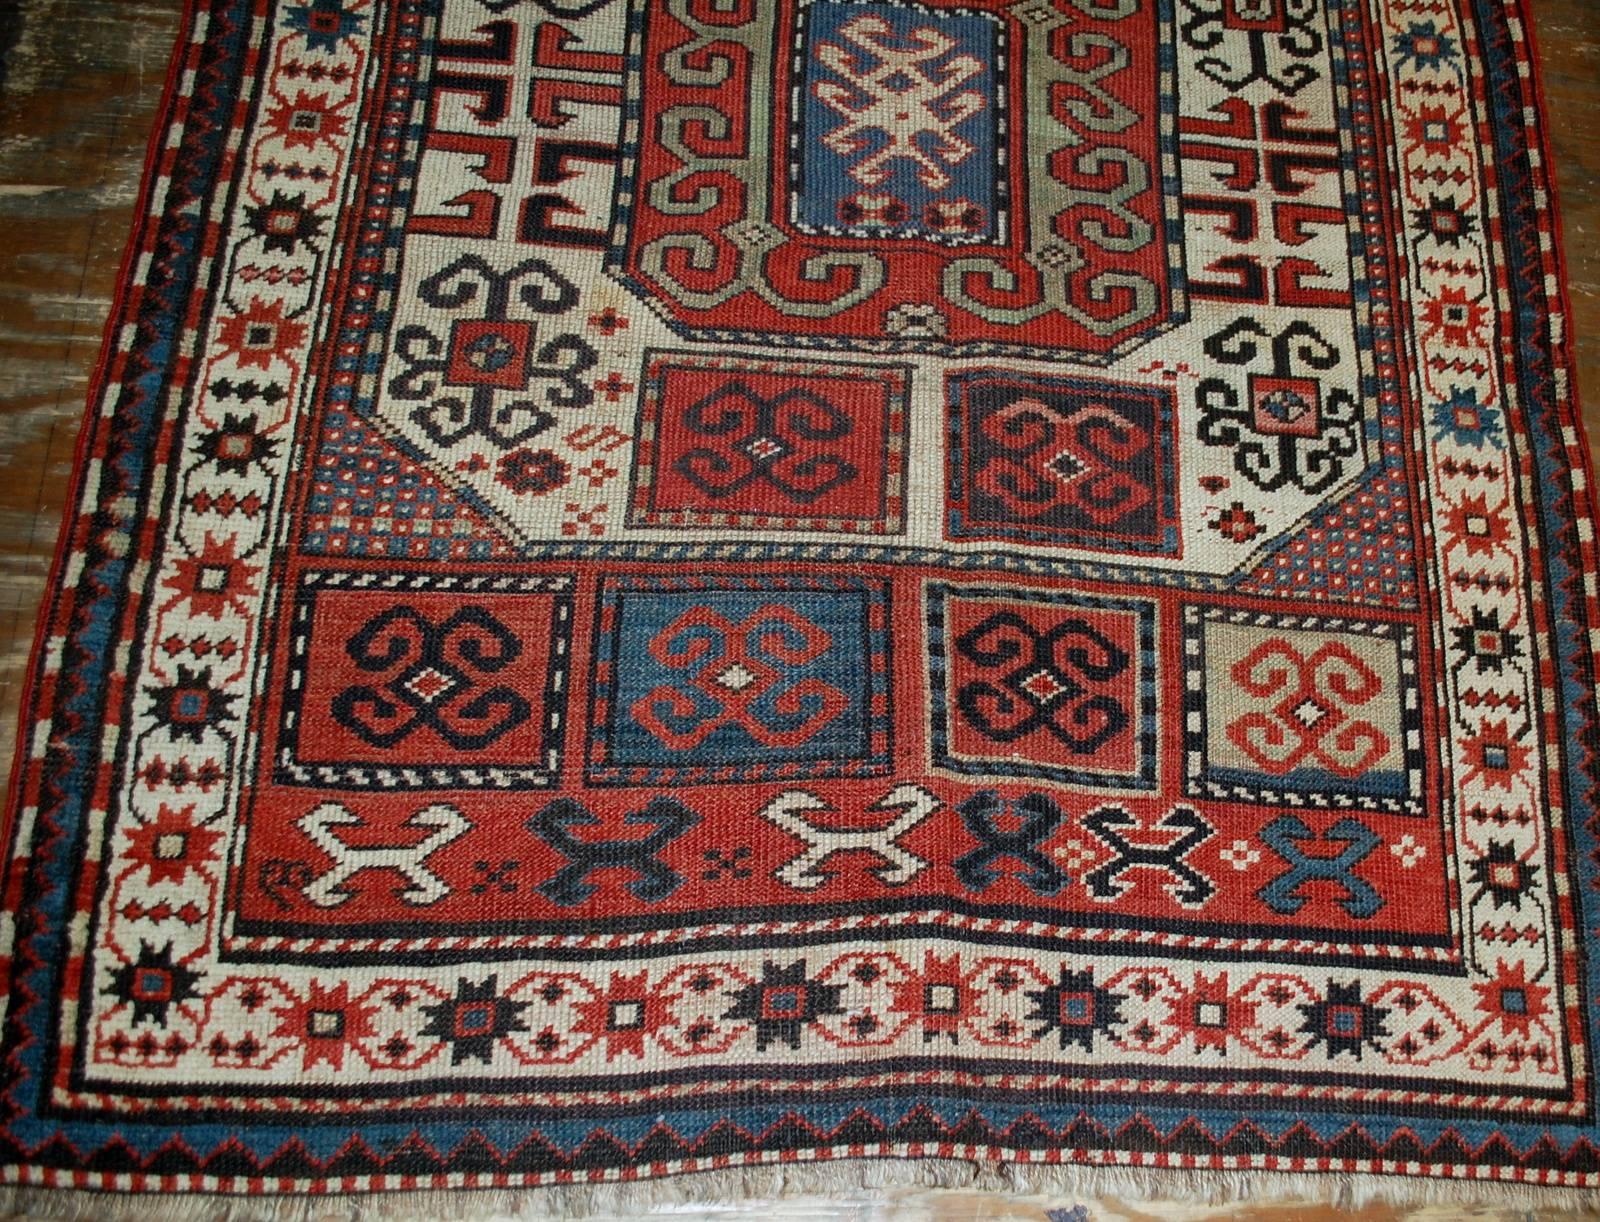 Antique handmade Russian Karabagh rug in great condition. The rug has been made in geometric design mixed with tribal. Very interesting two large medallions in the middle. White border decorated in tribal design as well. The rug has been restored